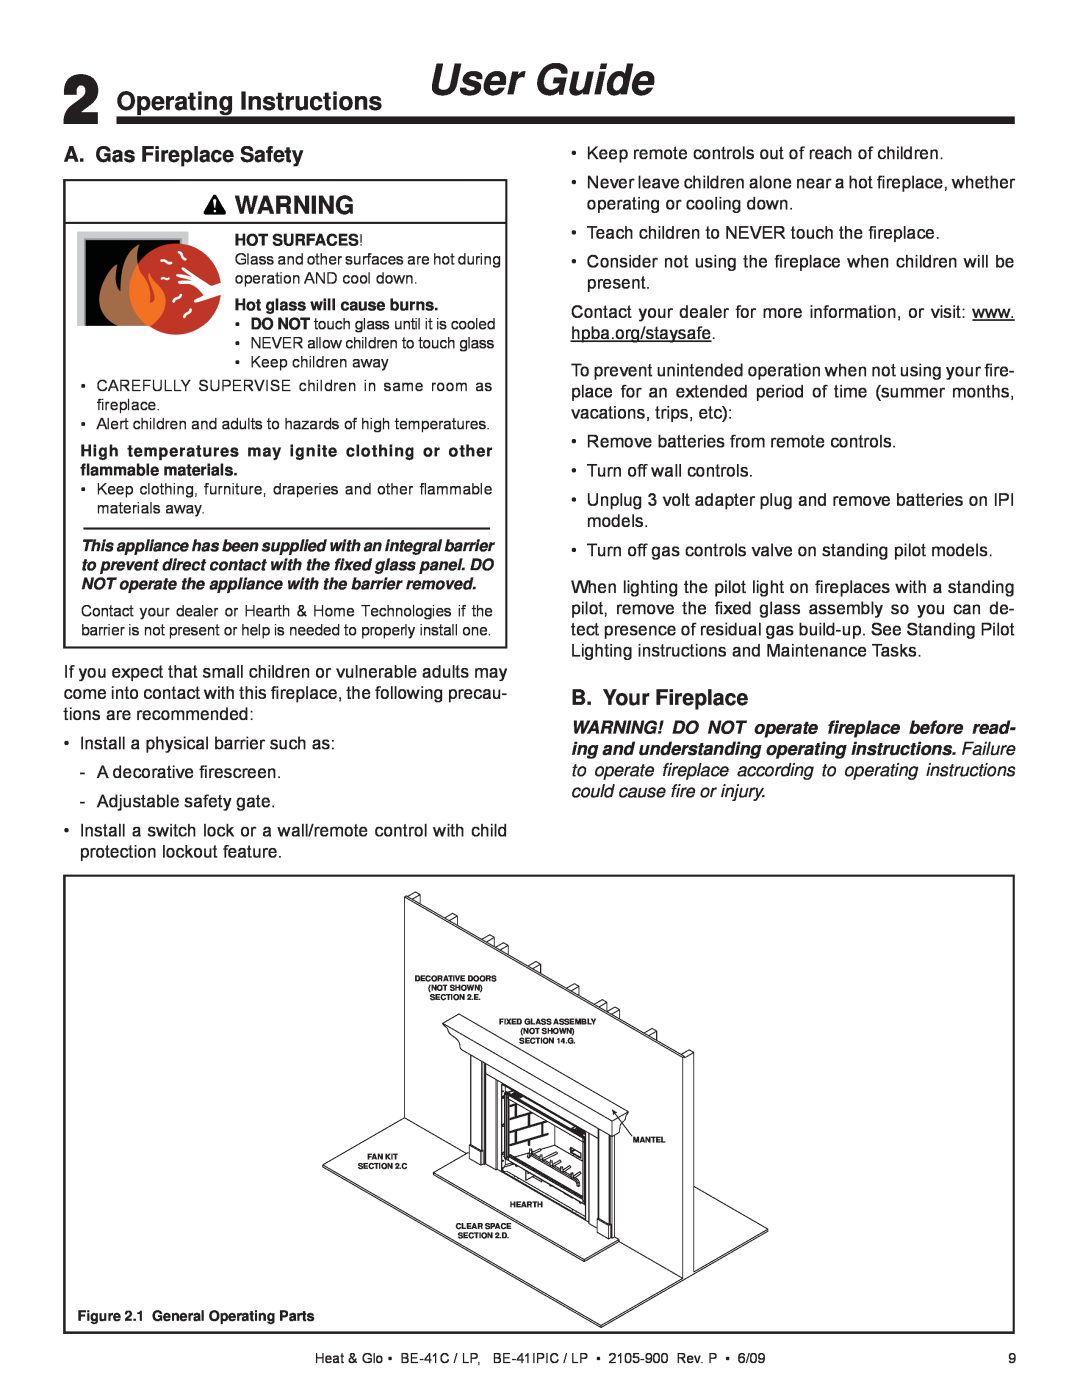 Heat & Glo LifeStyle BE-41IPIC, BE-41C Operating Instructions User Guide, A. Gas Fireplace Safety, B. Your Fireplace 